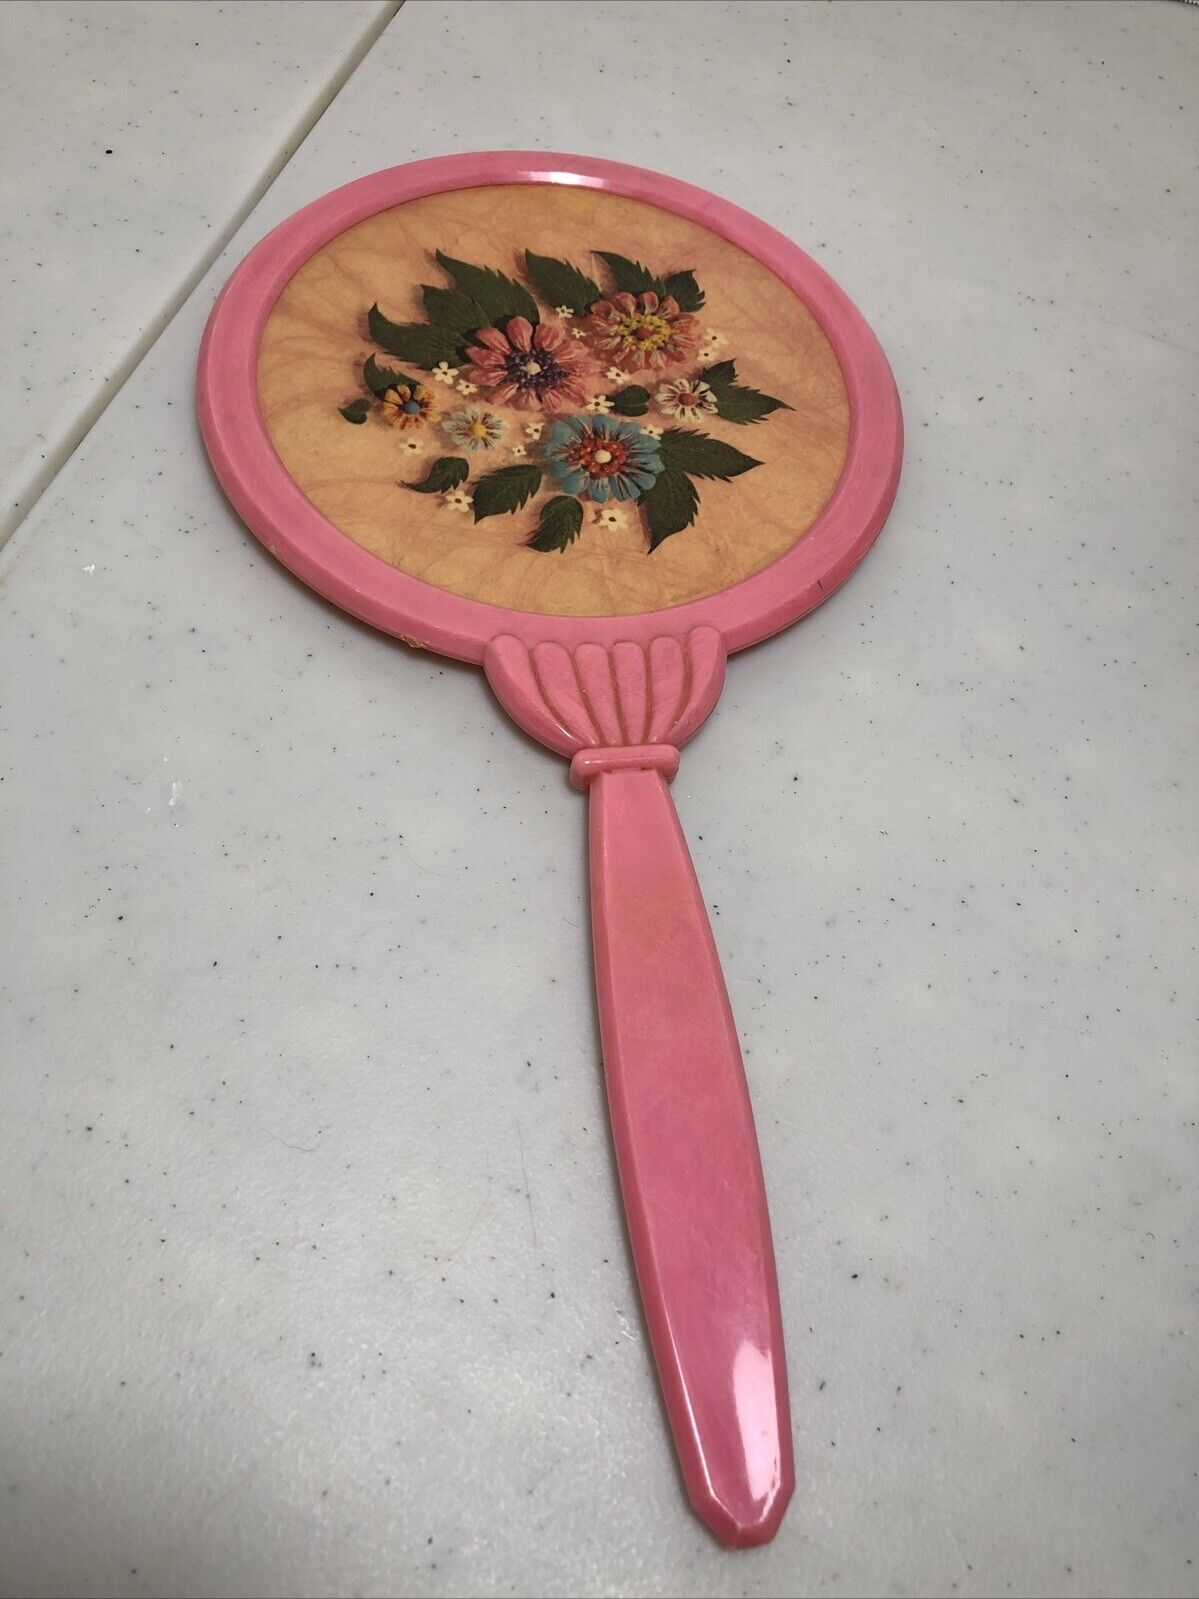 1960’s-70’s Vintage Celluloid Pink Hand Held Vanity Mirror with Flowers